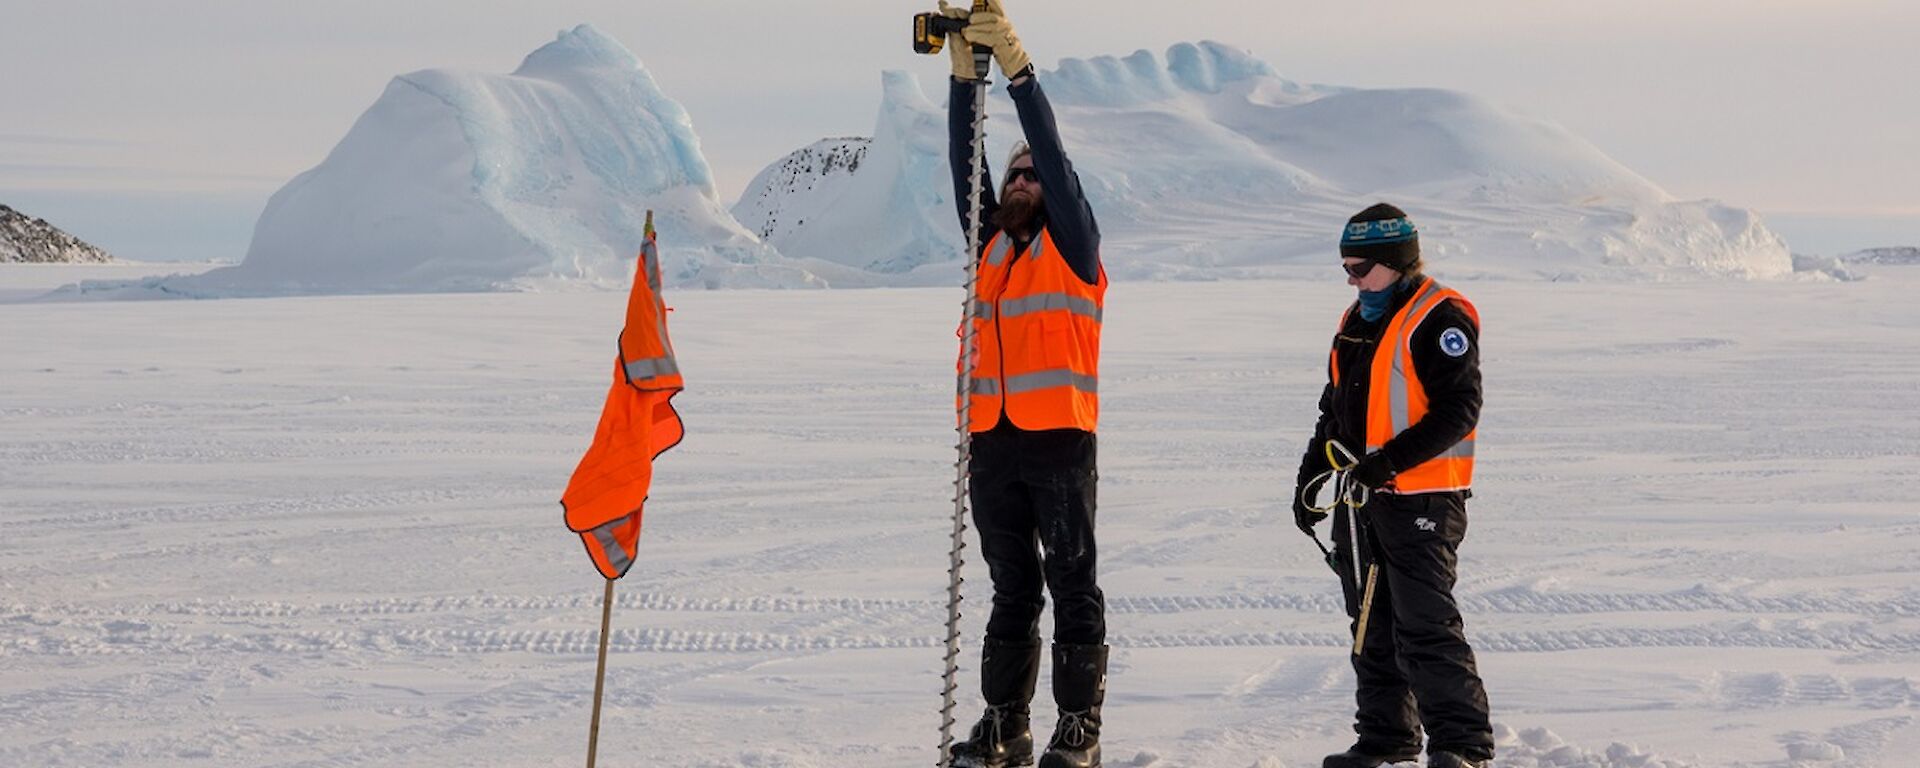 Sharky is holding a two metre long drill to take an ice core at a flagged post. Kirsten is holding the tape measure.